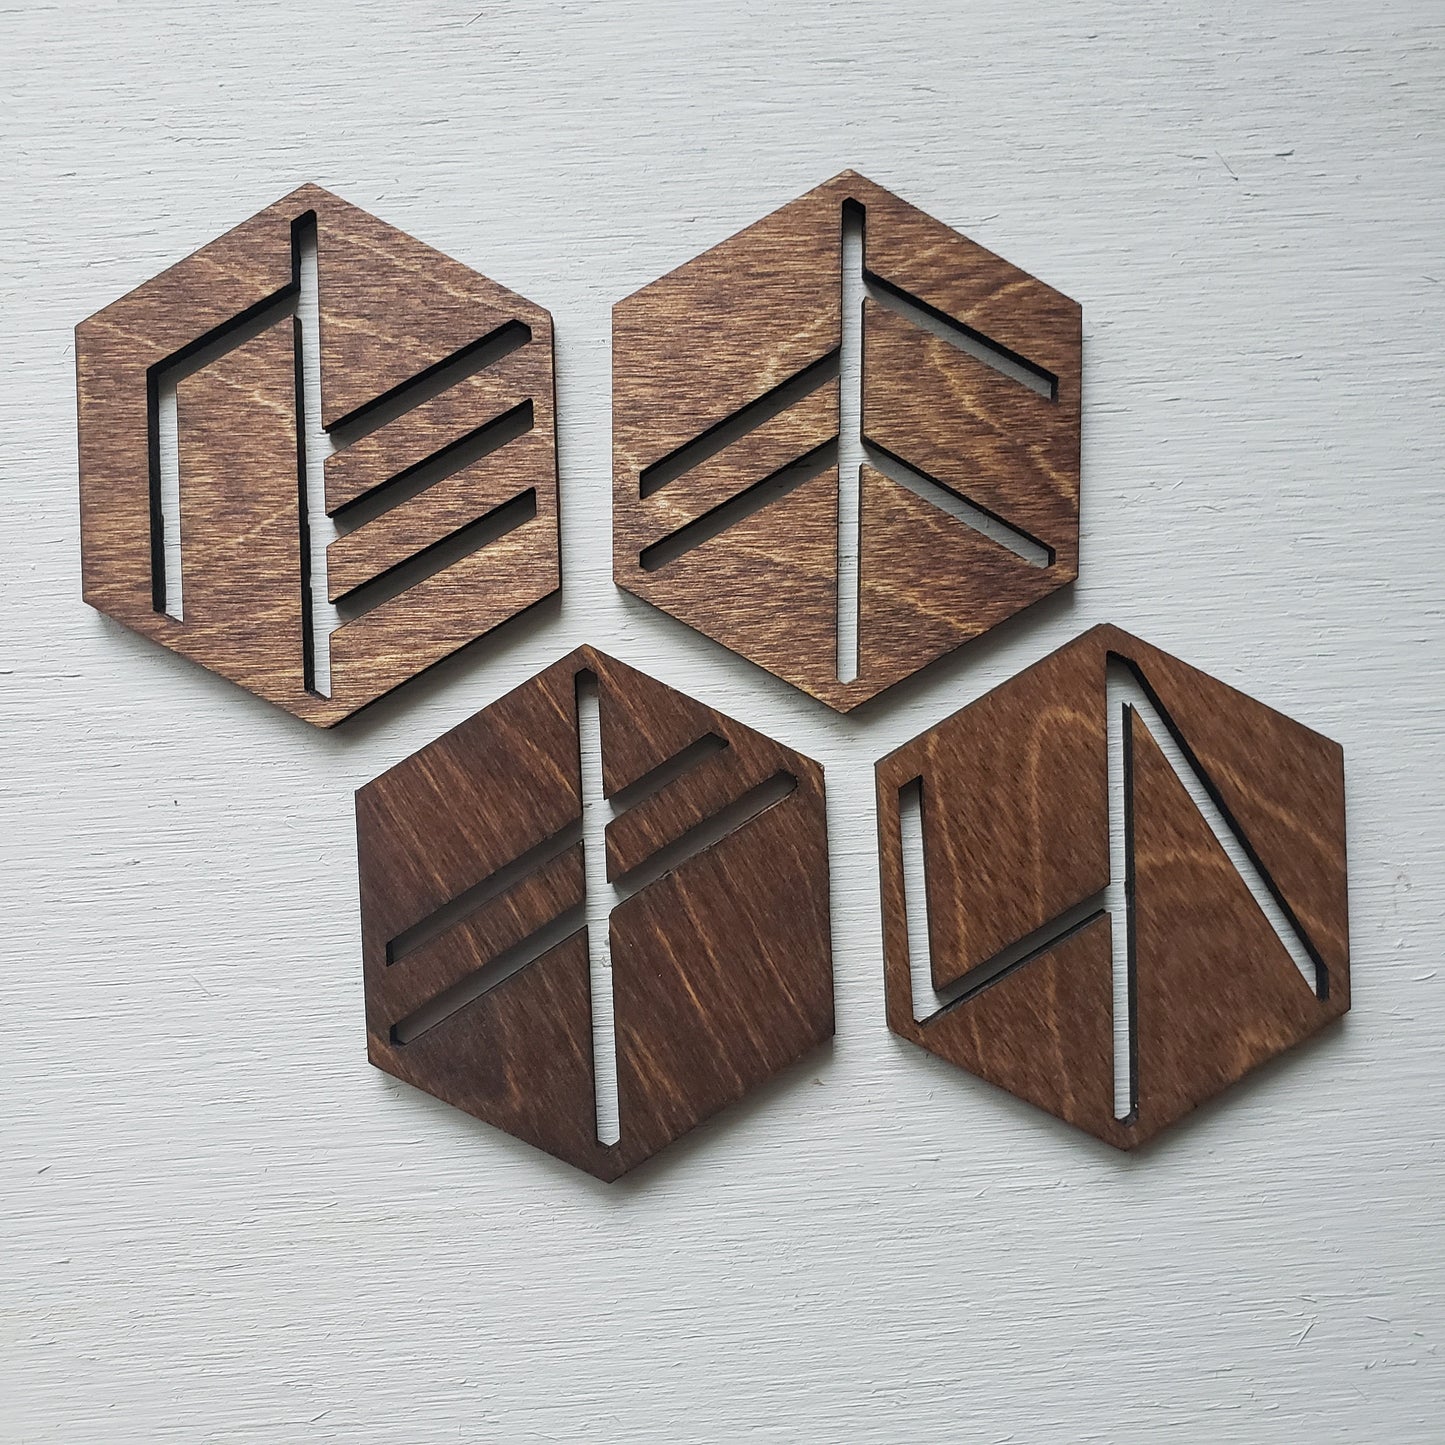  12 Pieces Unfinished Wood Coasters, GOH DODD 4 Inch Hexagon  Blank Wooden Coasters Crafts Coasters for DIY Architectural Models Drawing  Painting Wood Engraving Wood Burning Laser Scroll Sawing : Home & Kitchen